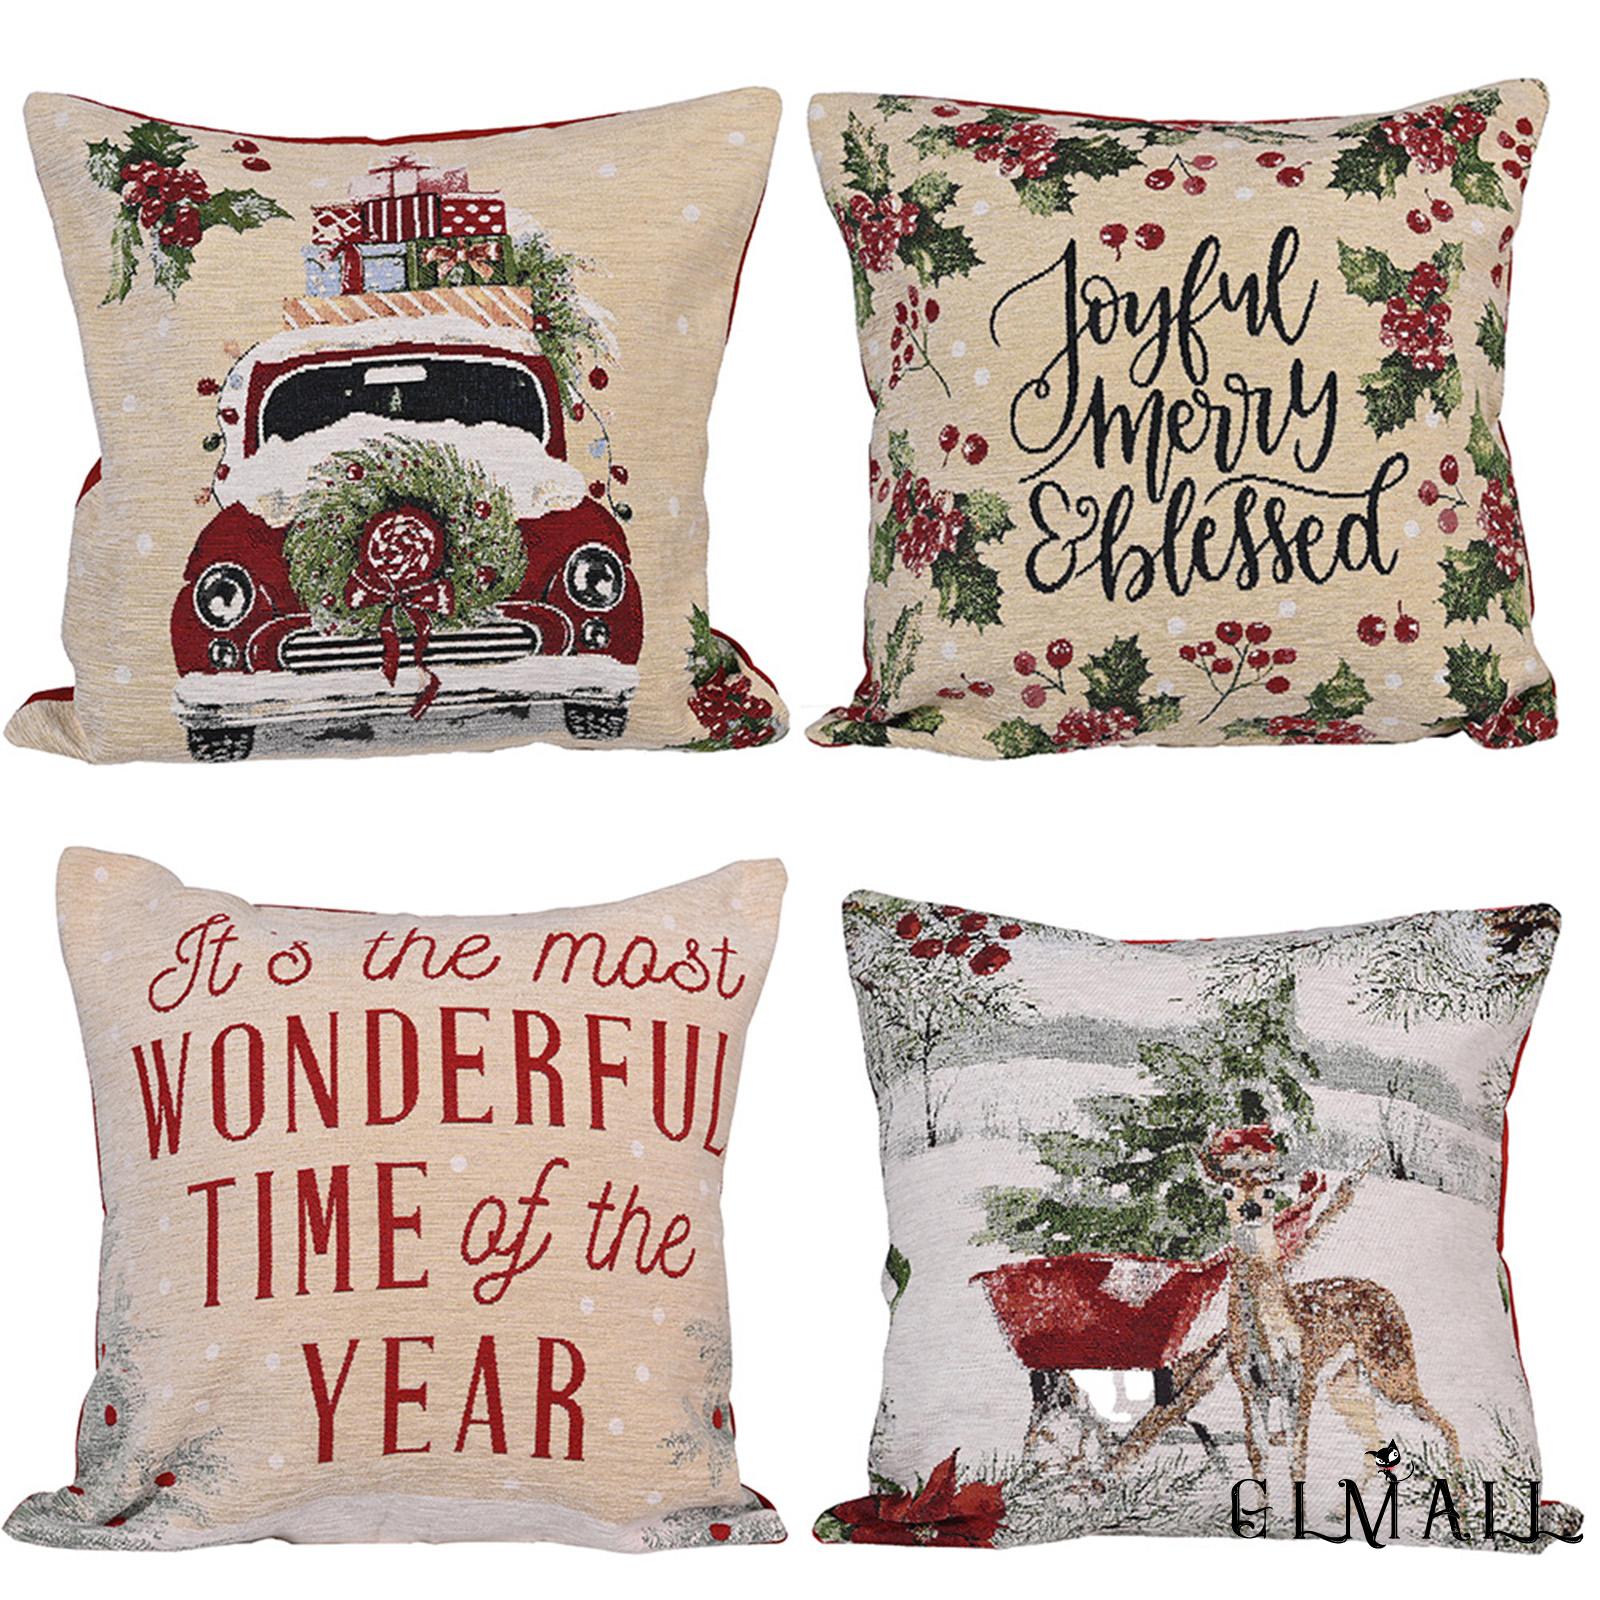 GML-Christmas Pillow Covers, Farmhouse Reindeer Truck Red Berries Letter Print Throw Cushion Covers for Sofa, Couch, Bed